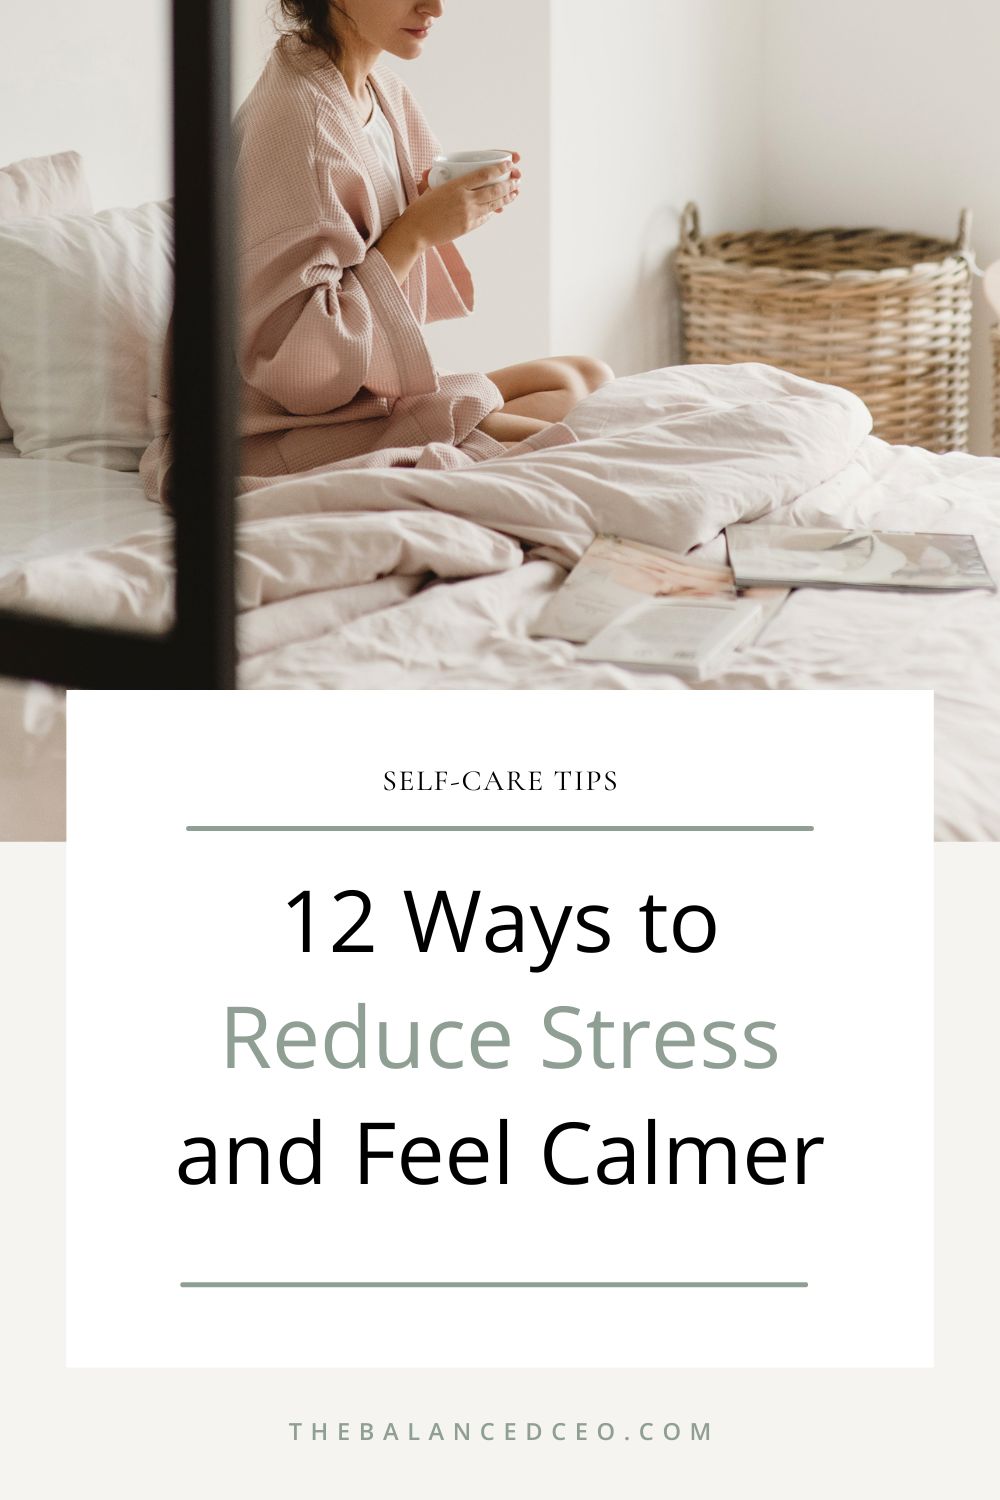 12 Ways to Reduce Stress and Feel Calmer